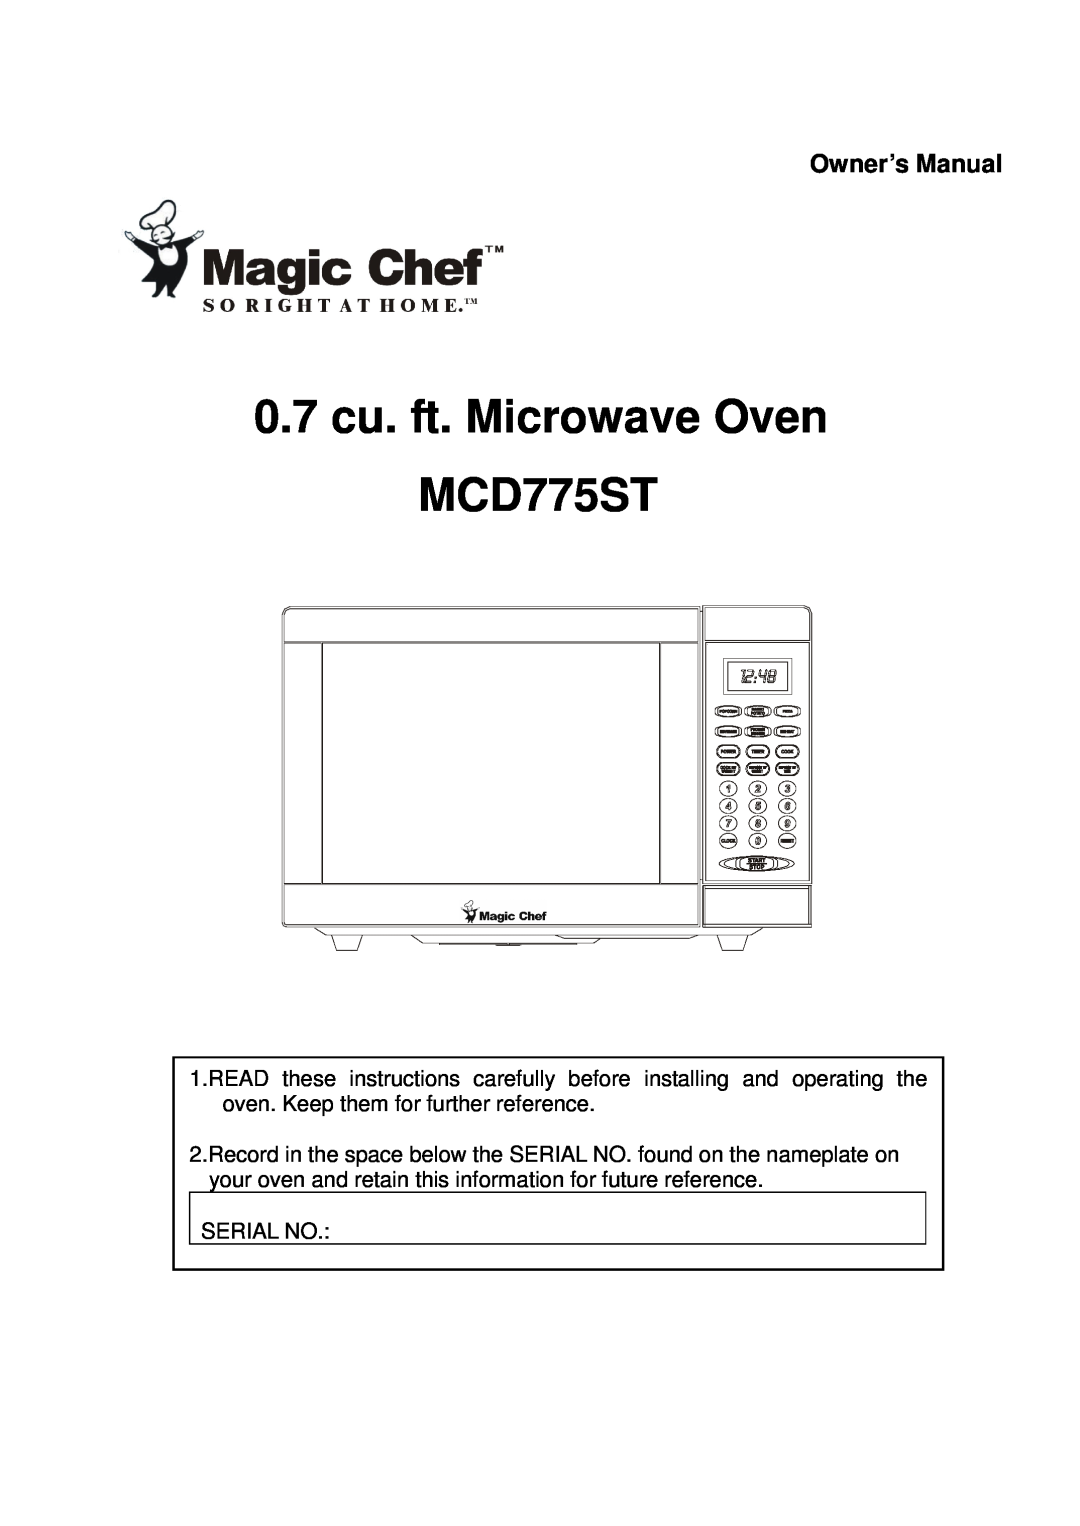 Magic Chef owner manual 0.7cu. ft. Microwave Oven MCD775ST, Owner’s Manual 